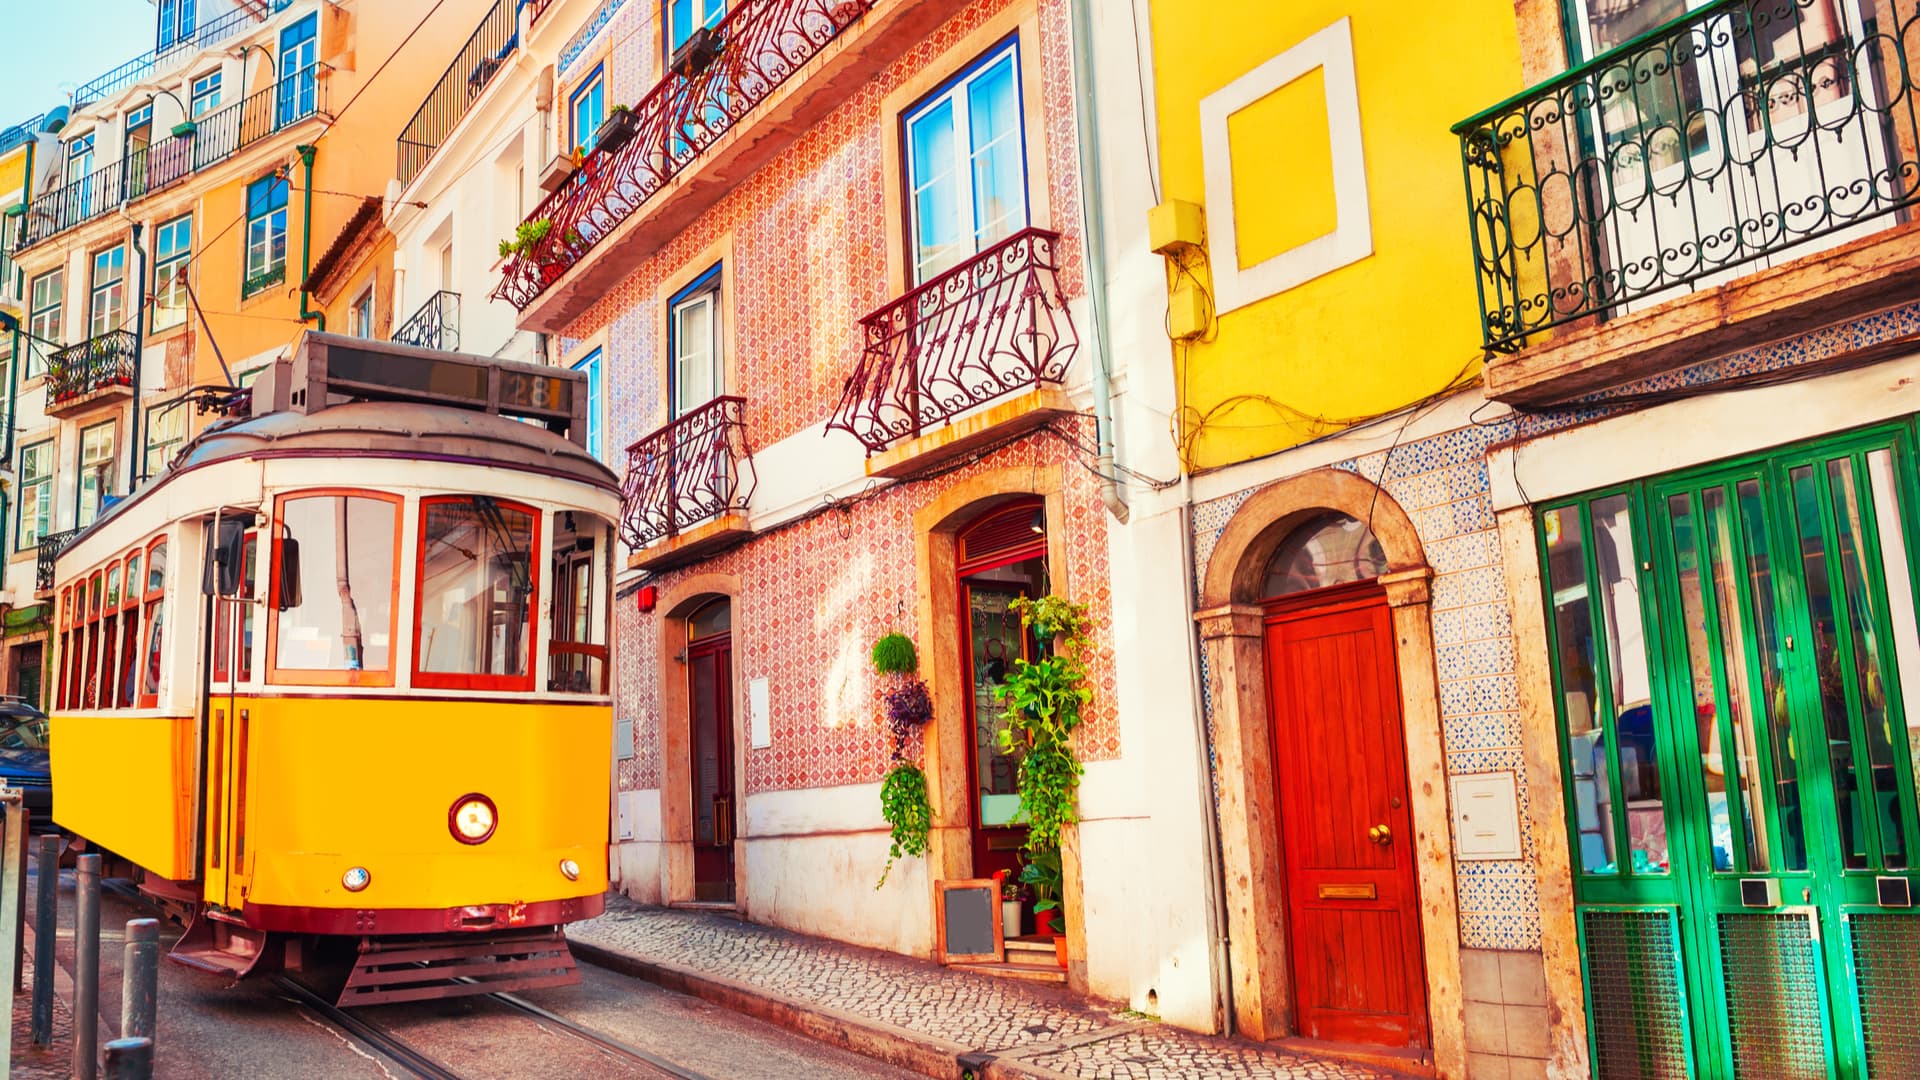 An image of a Portuguese city with vibrant colours and a yellow tram on the left. Guide to NHR in Portugal